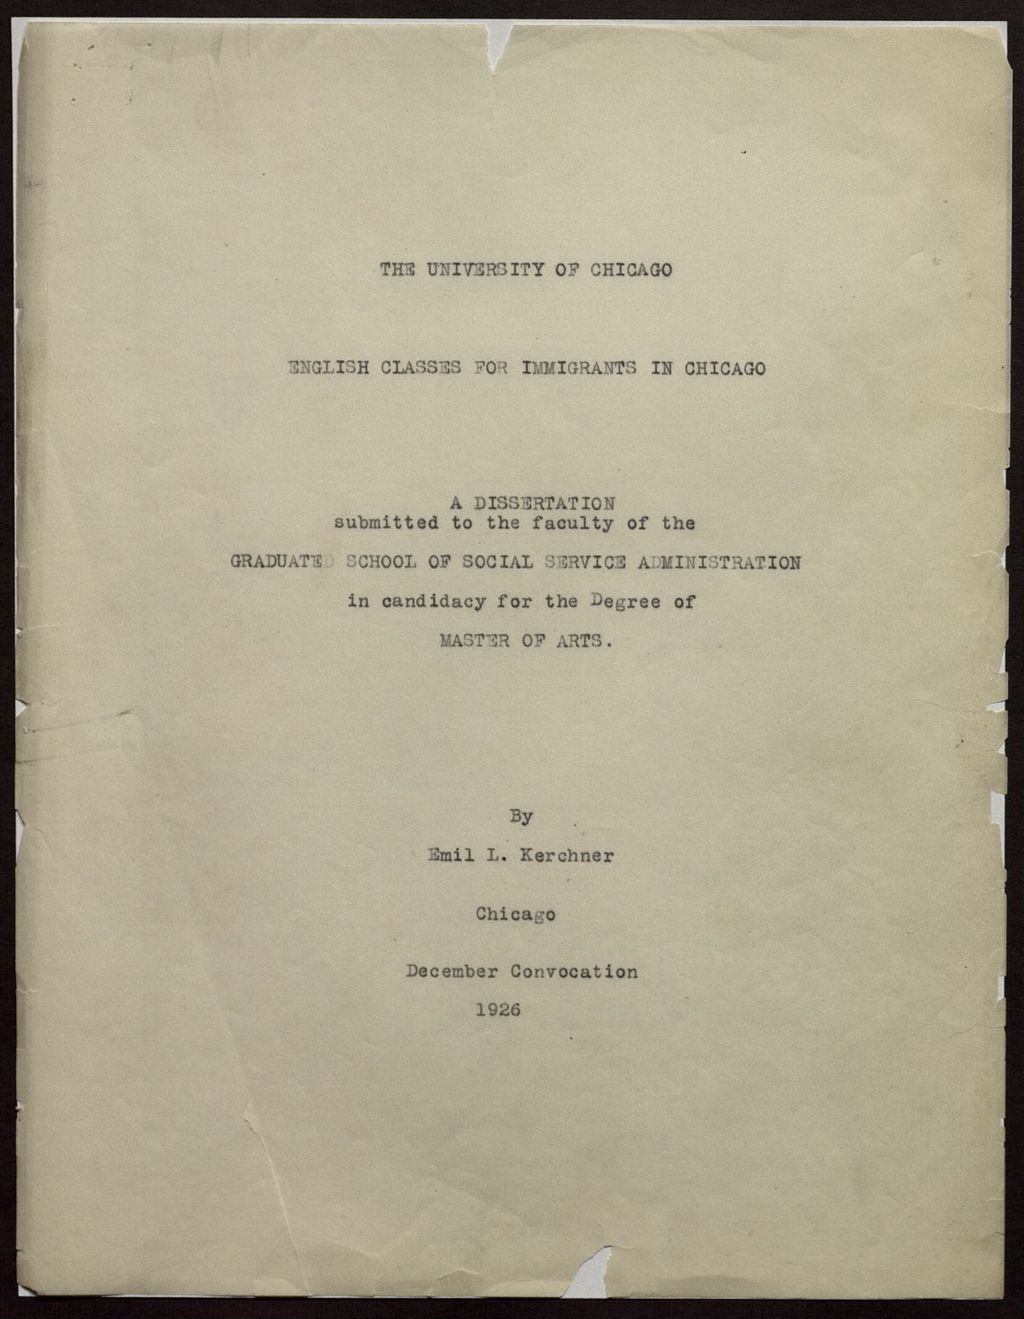 Miniature of "English Classes for Immigrants in Chicago" dissertation, 1927 (Folder 37)